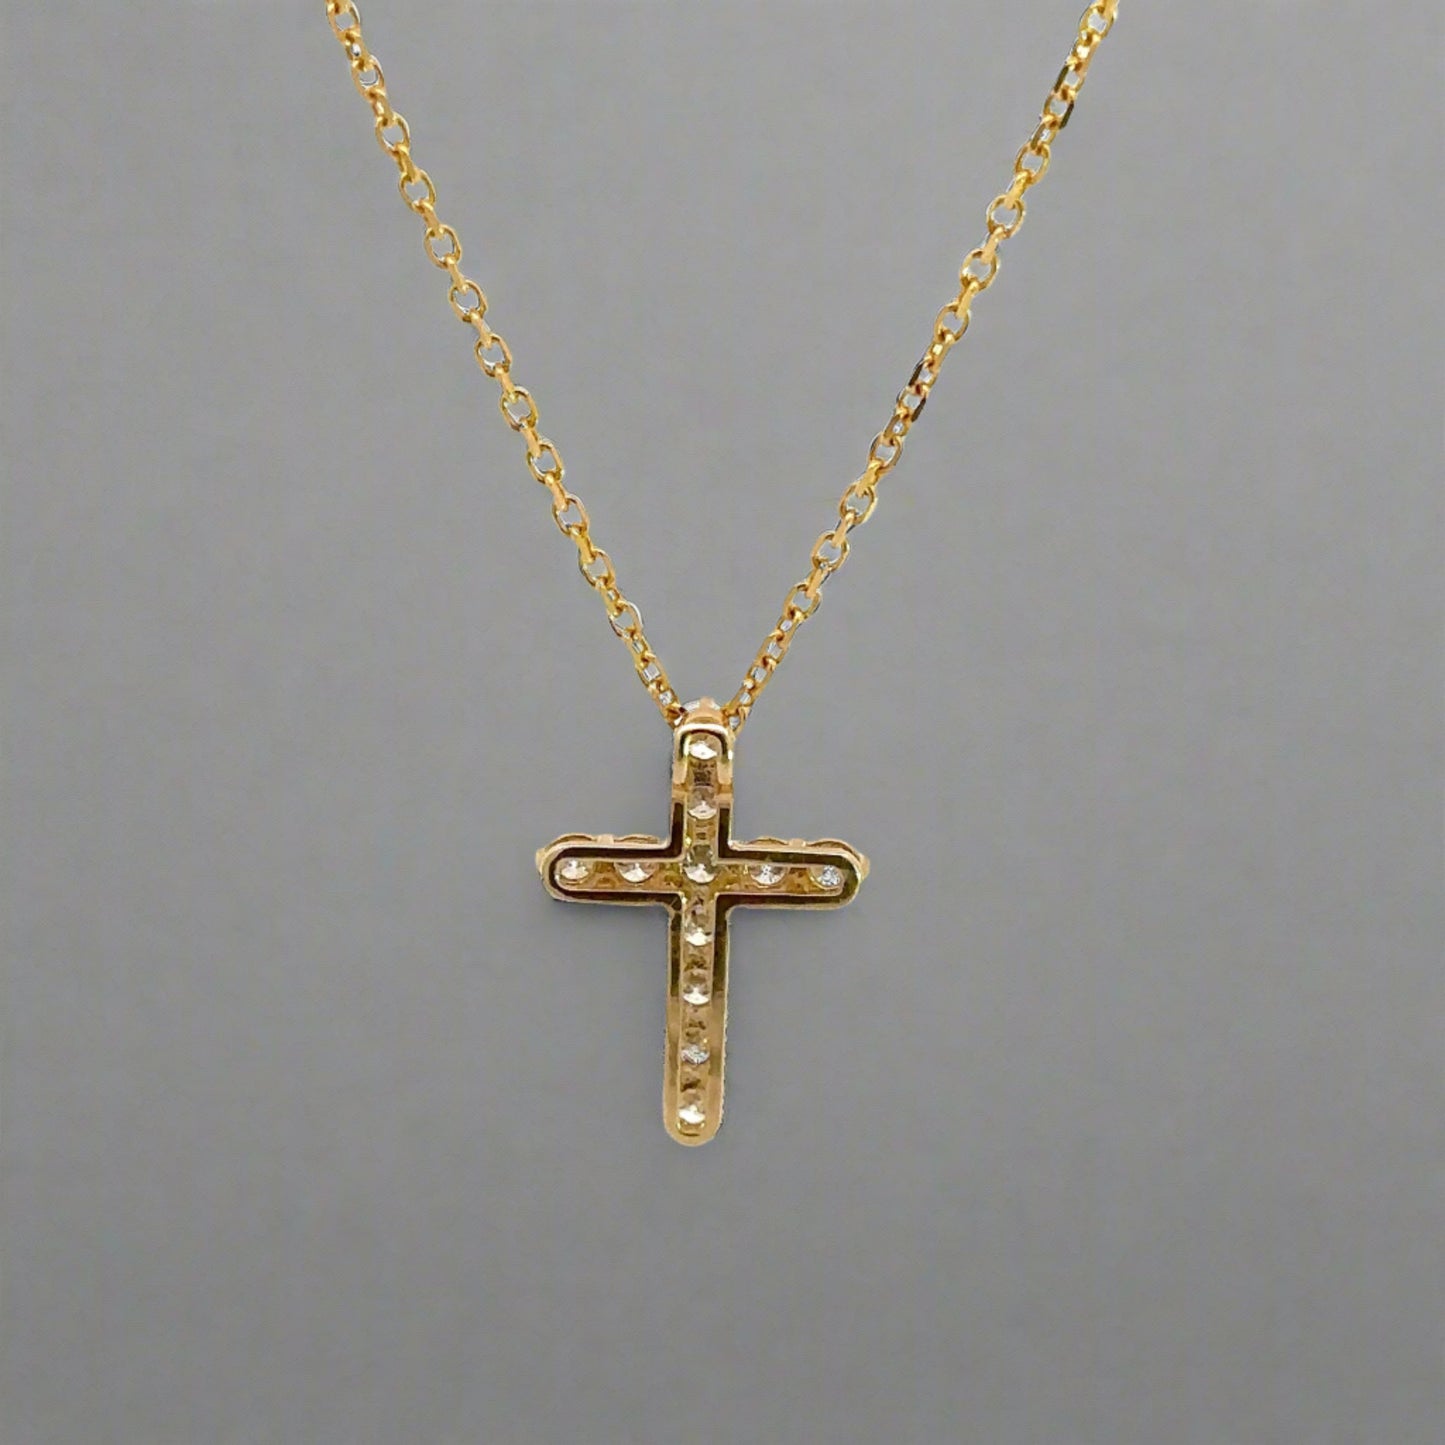 Back of cross with open back